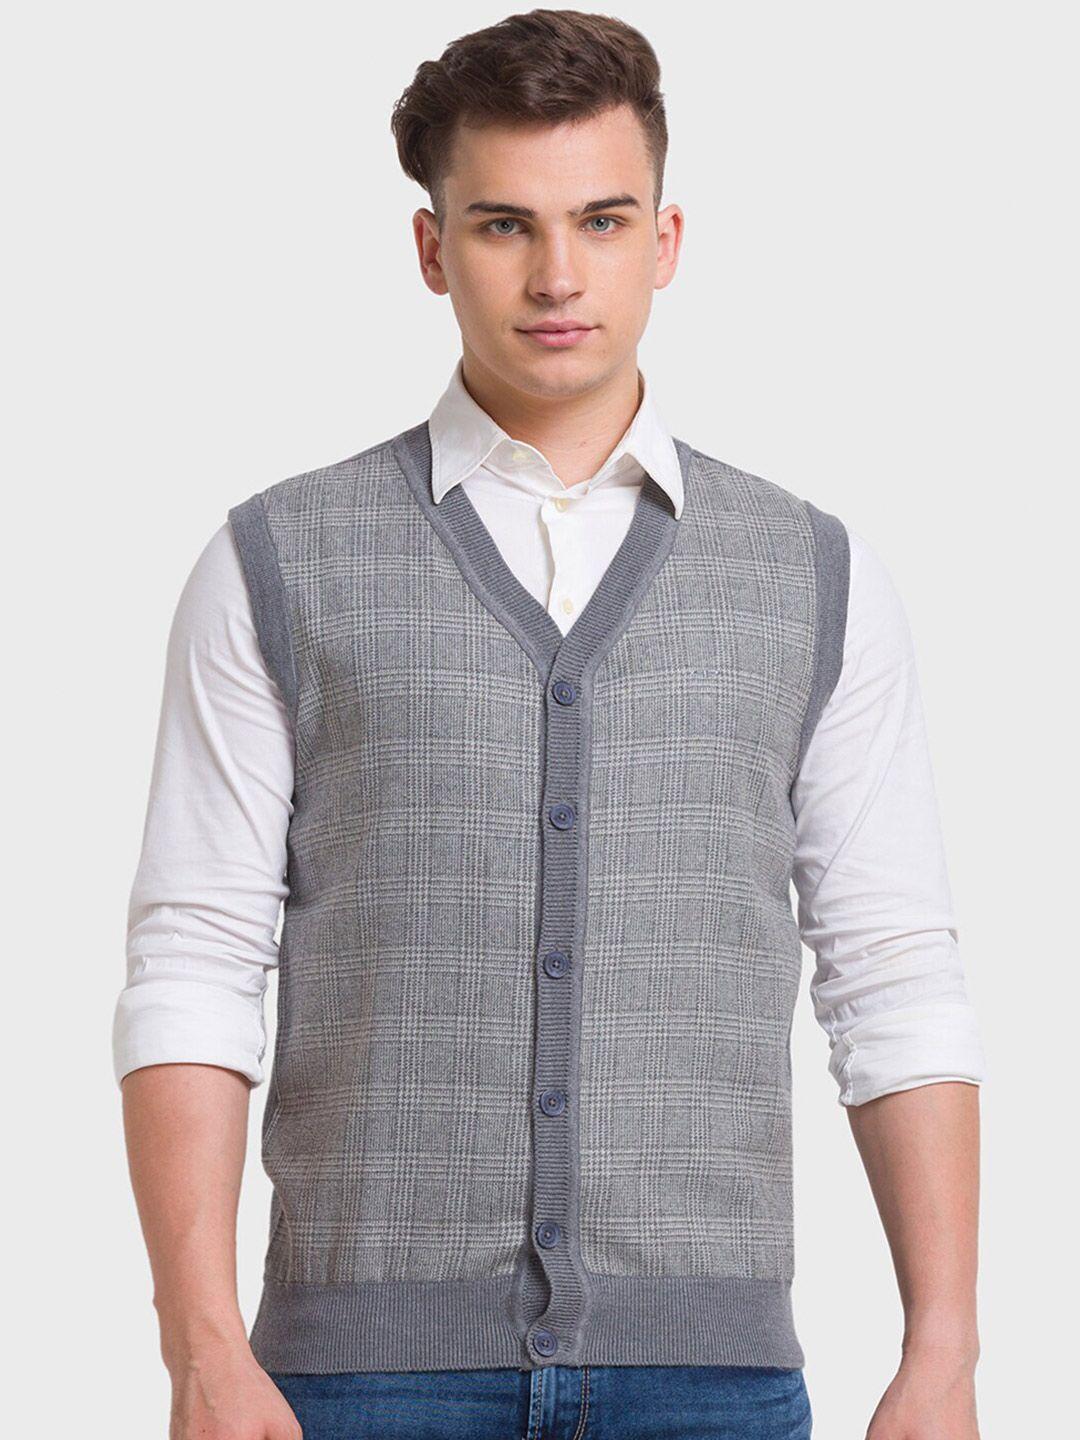 ColorPlus Classic Fit Checked Cardigan Sweater